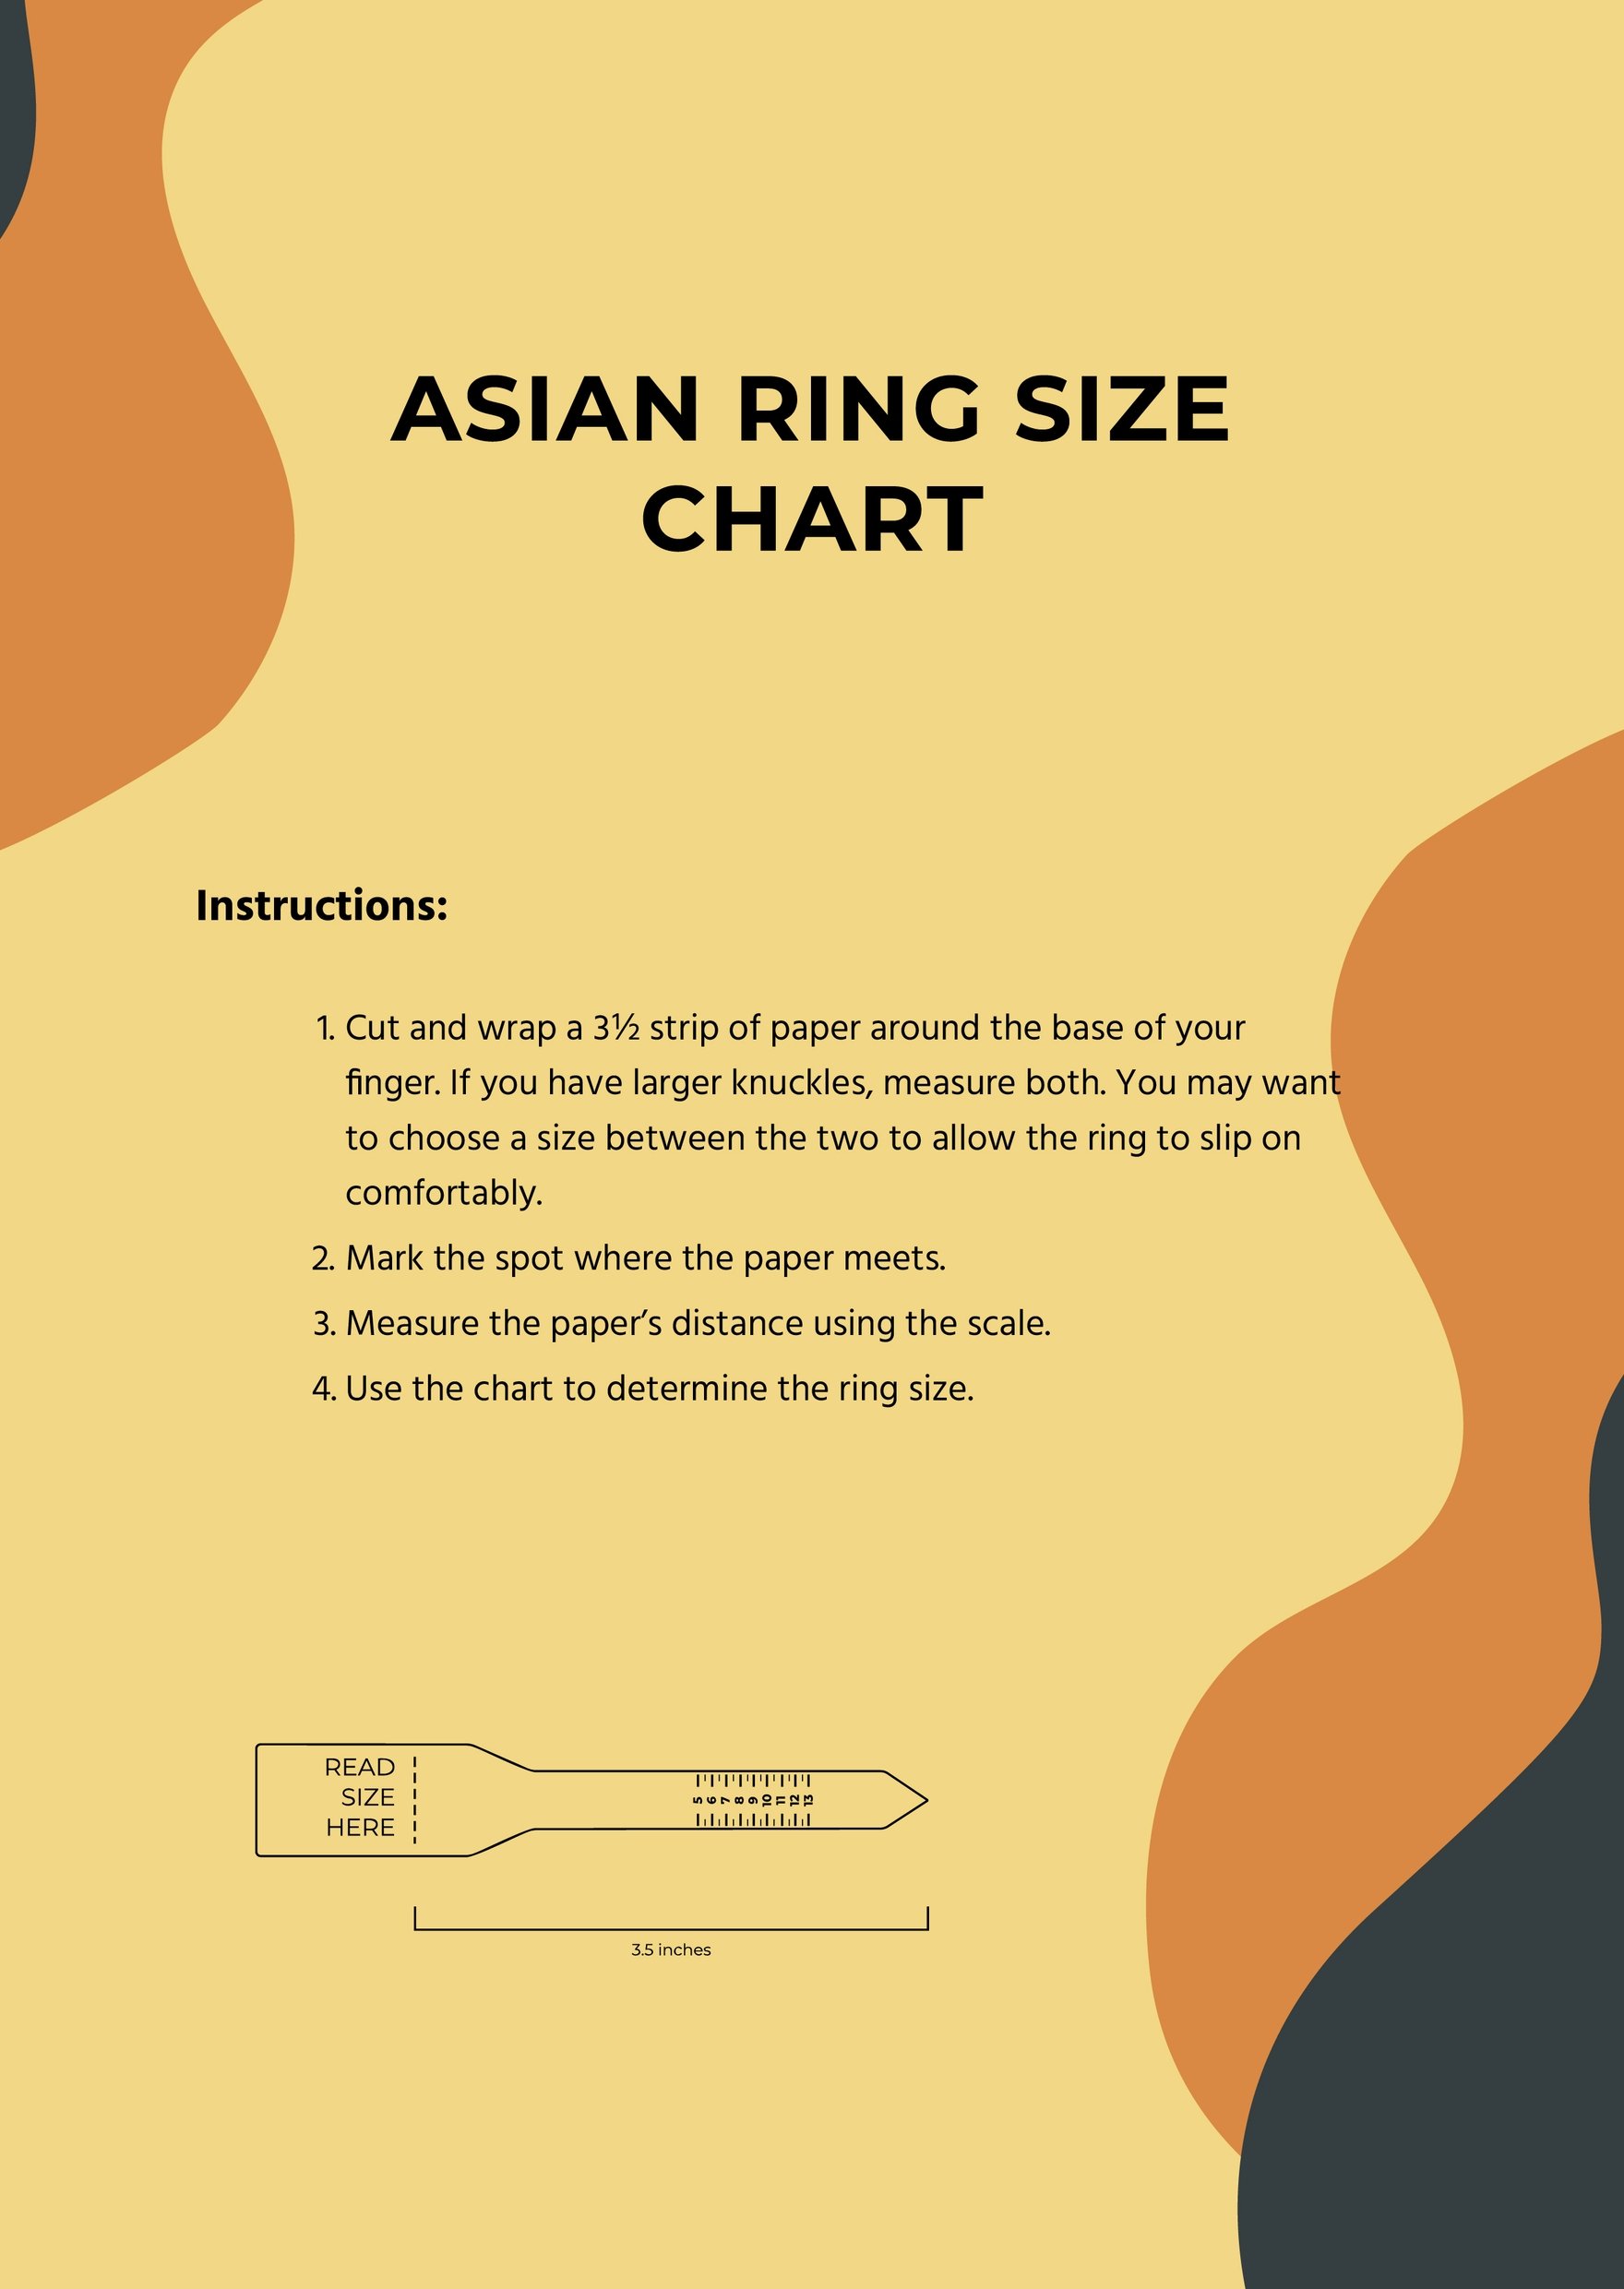 Asian Ring Size Chart Template